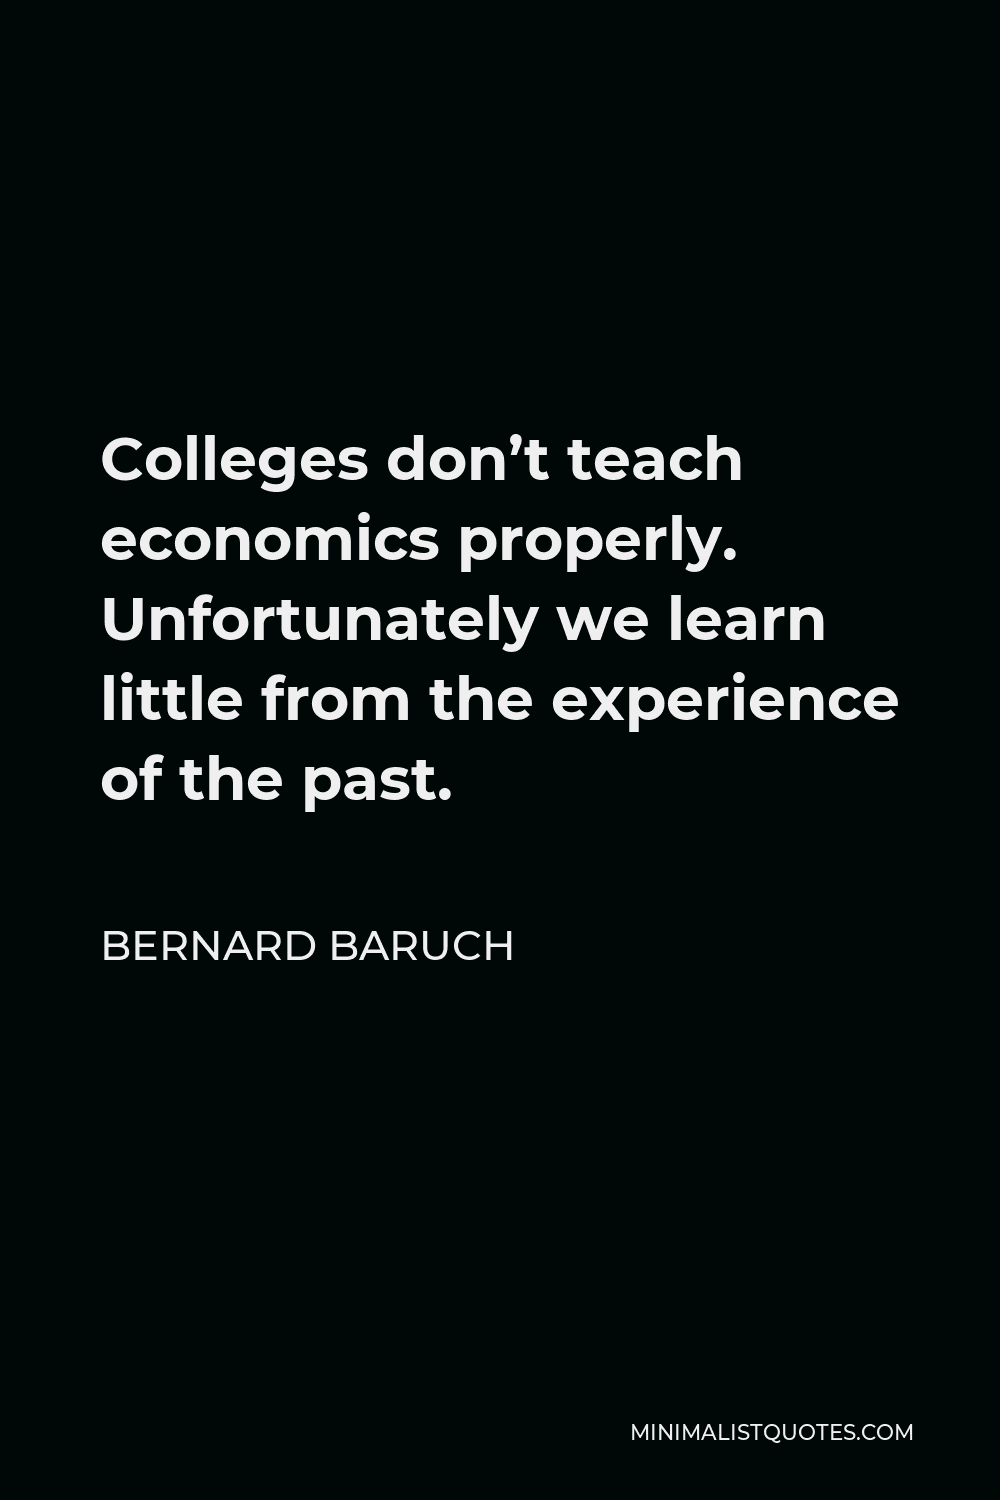 Bernard Baruch Quote - Colleges don’t teach economics properly. Unfortunately we learn little from the experience of the past.